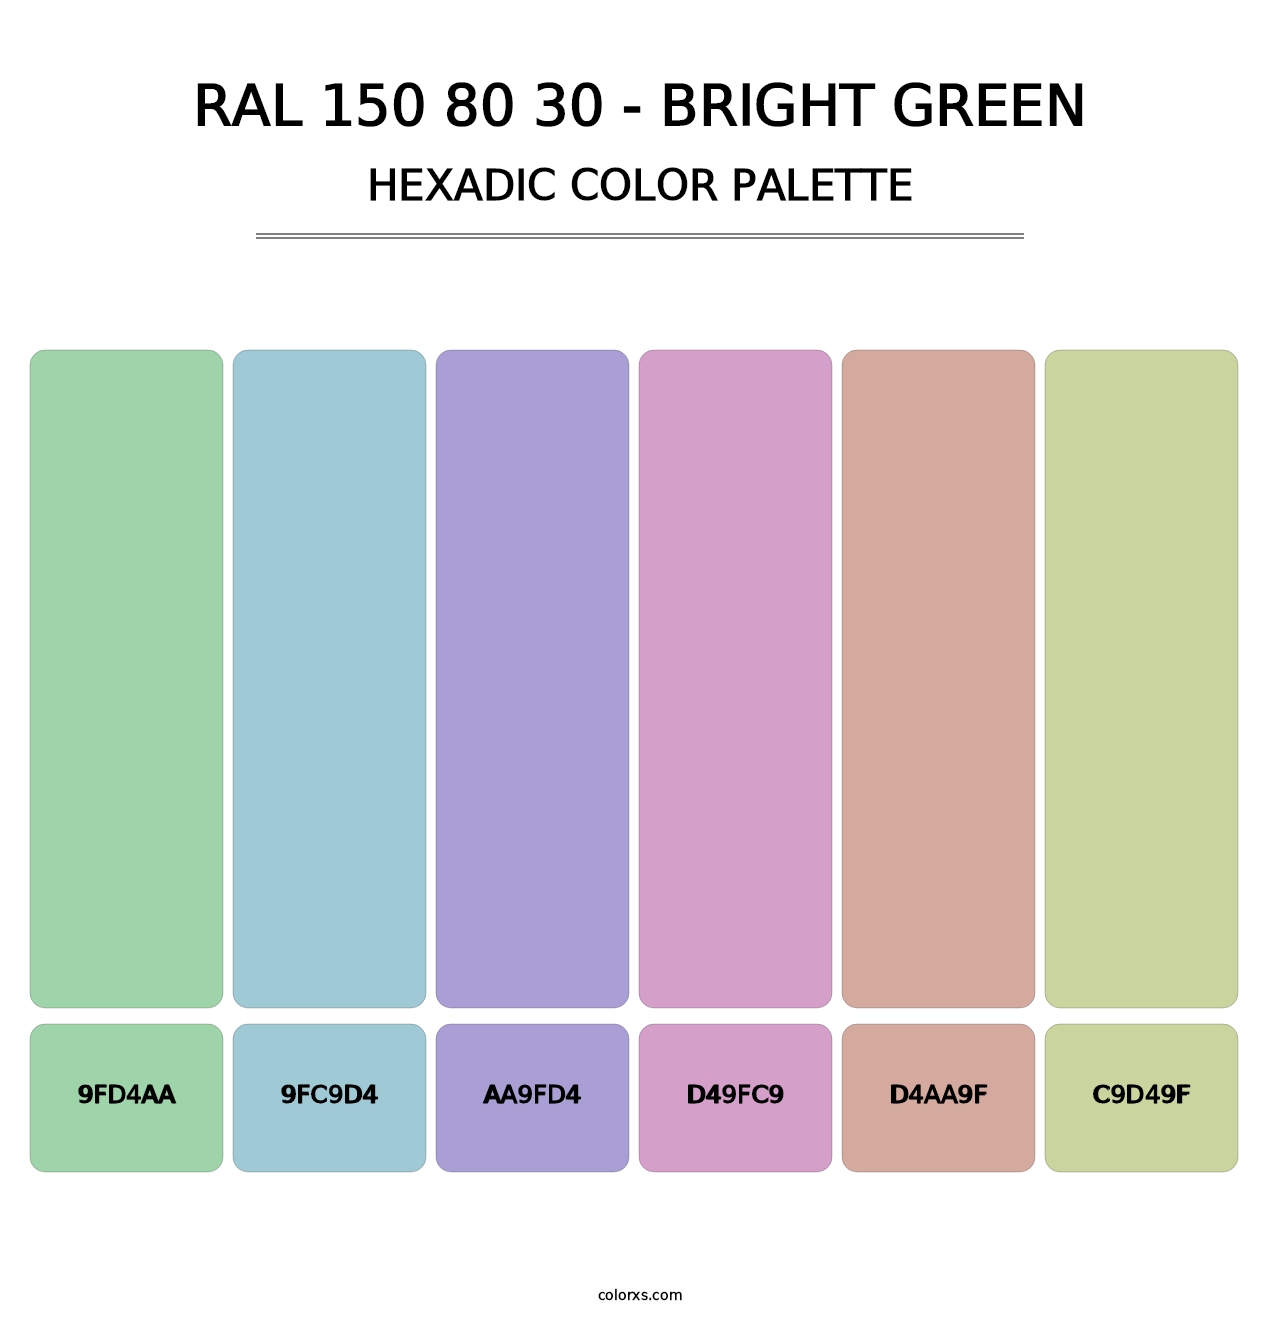 RAL 150 80 30 - Bright Green - Hexadic Color Palette